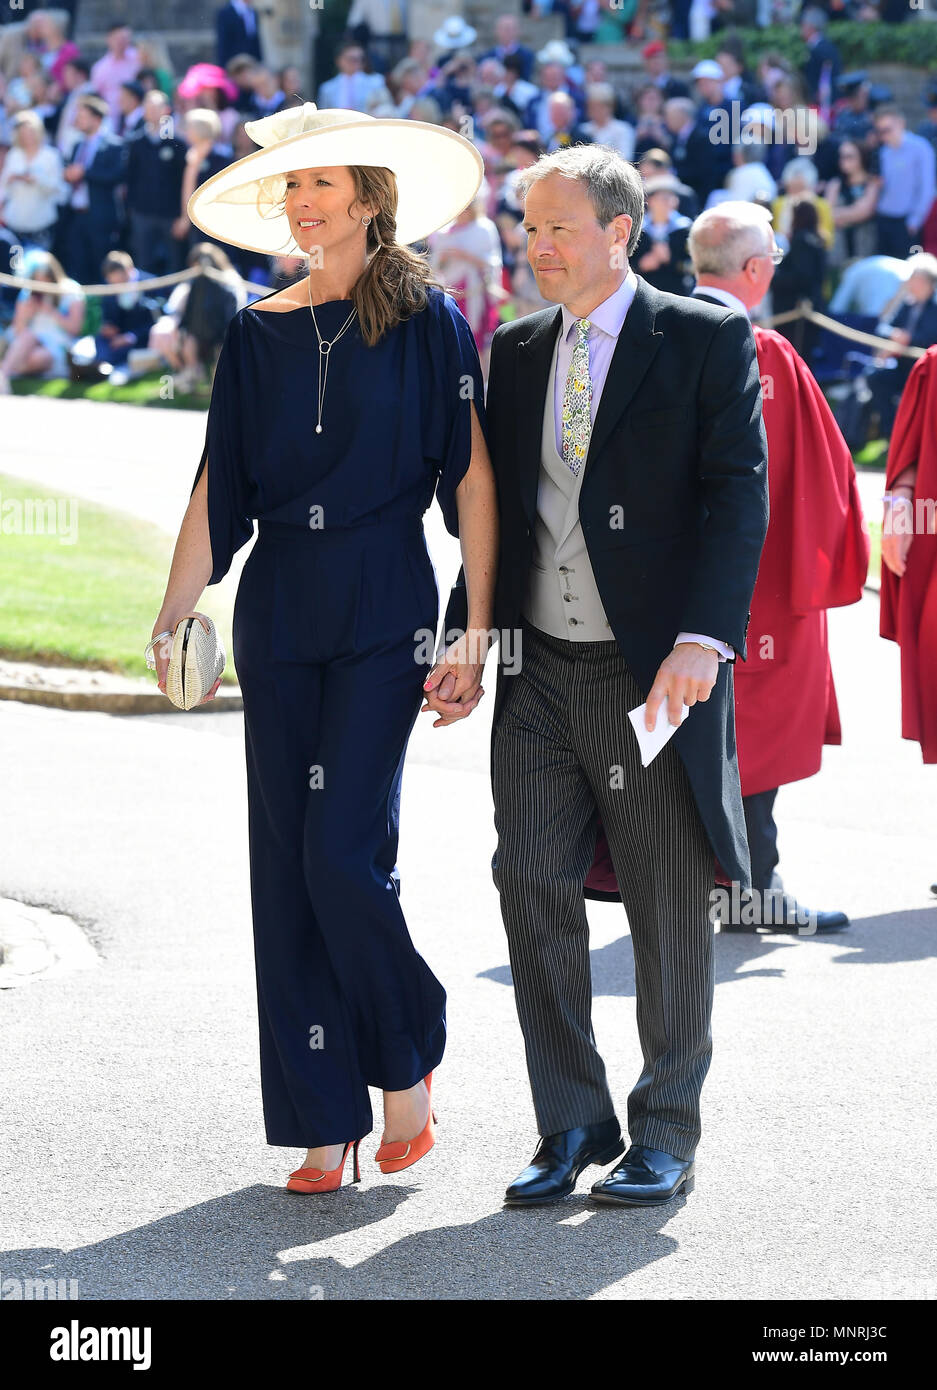 Jonny Wilkinson and Shelley Jenkins arrive at St George's Chapel at Windsor Castle for the wedding of Meghan Markle and Prince Harry. Stock Photo